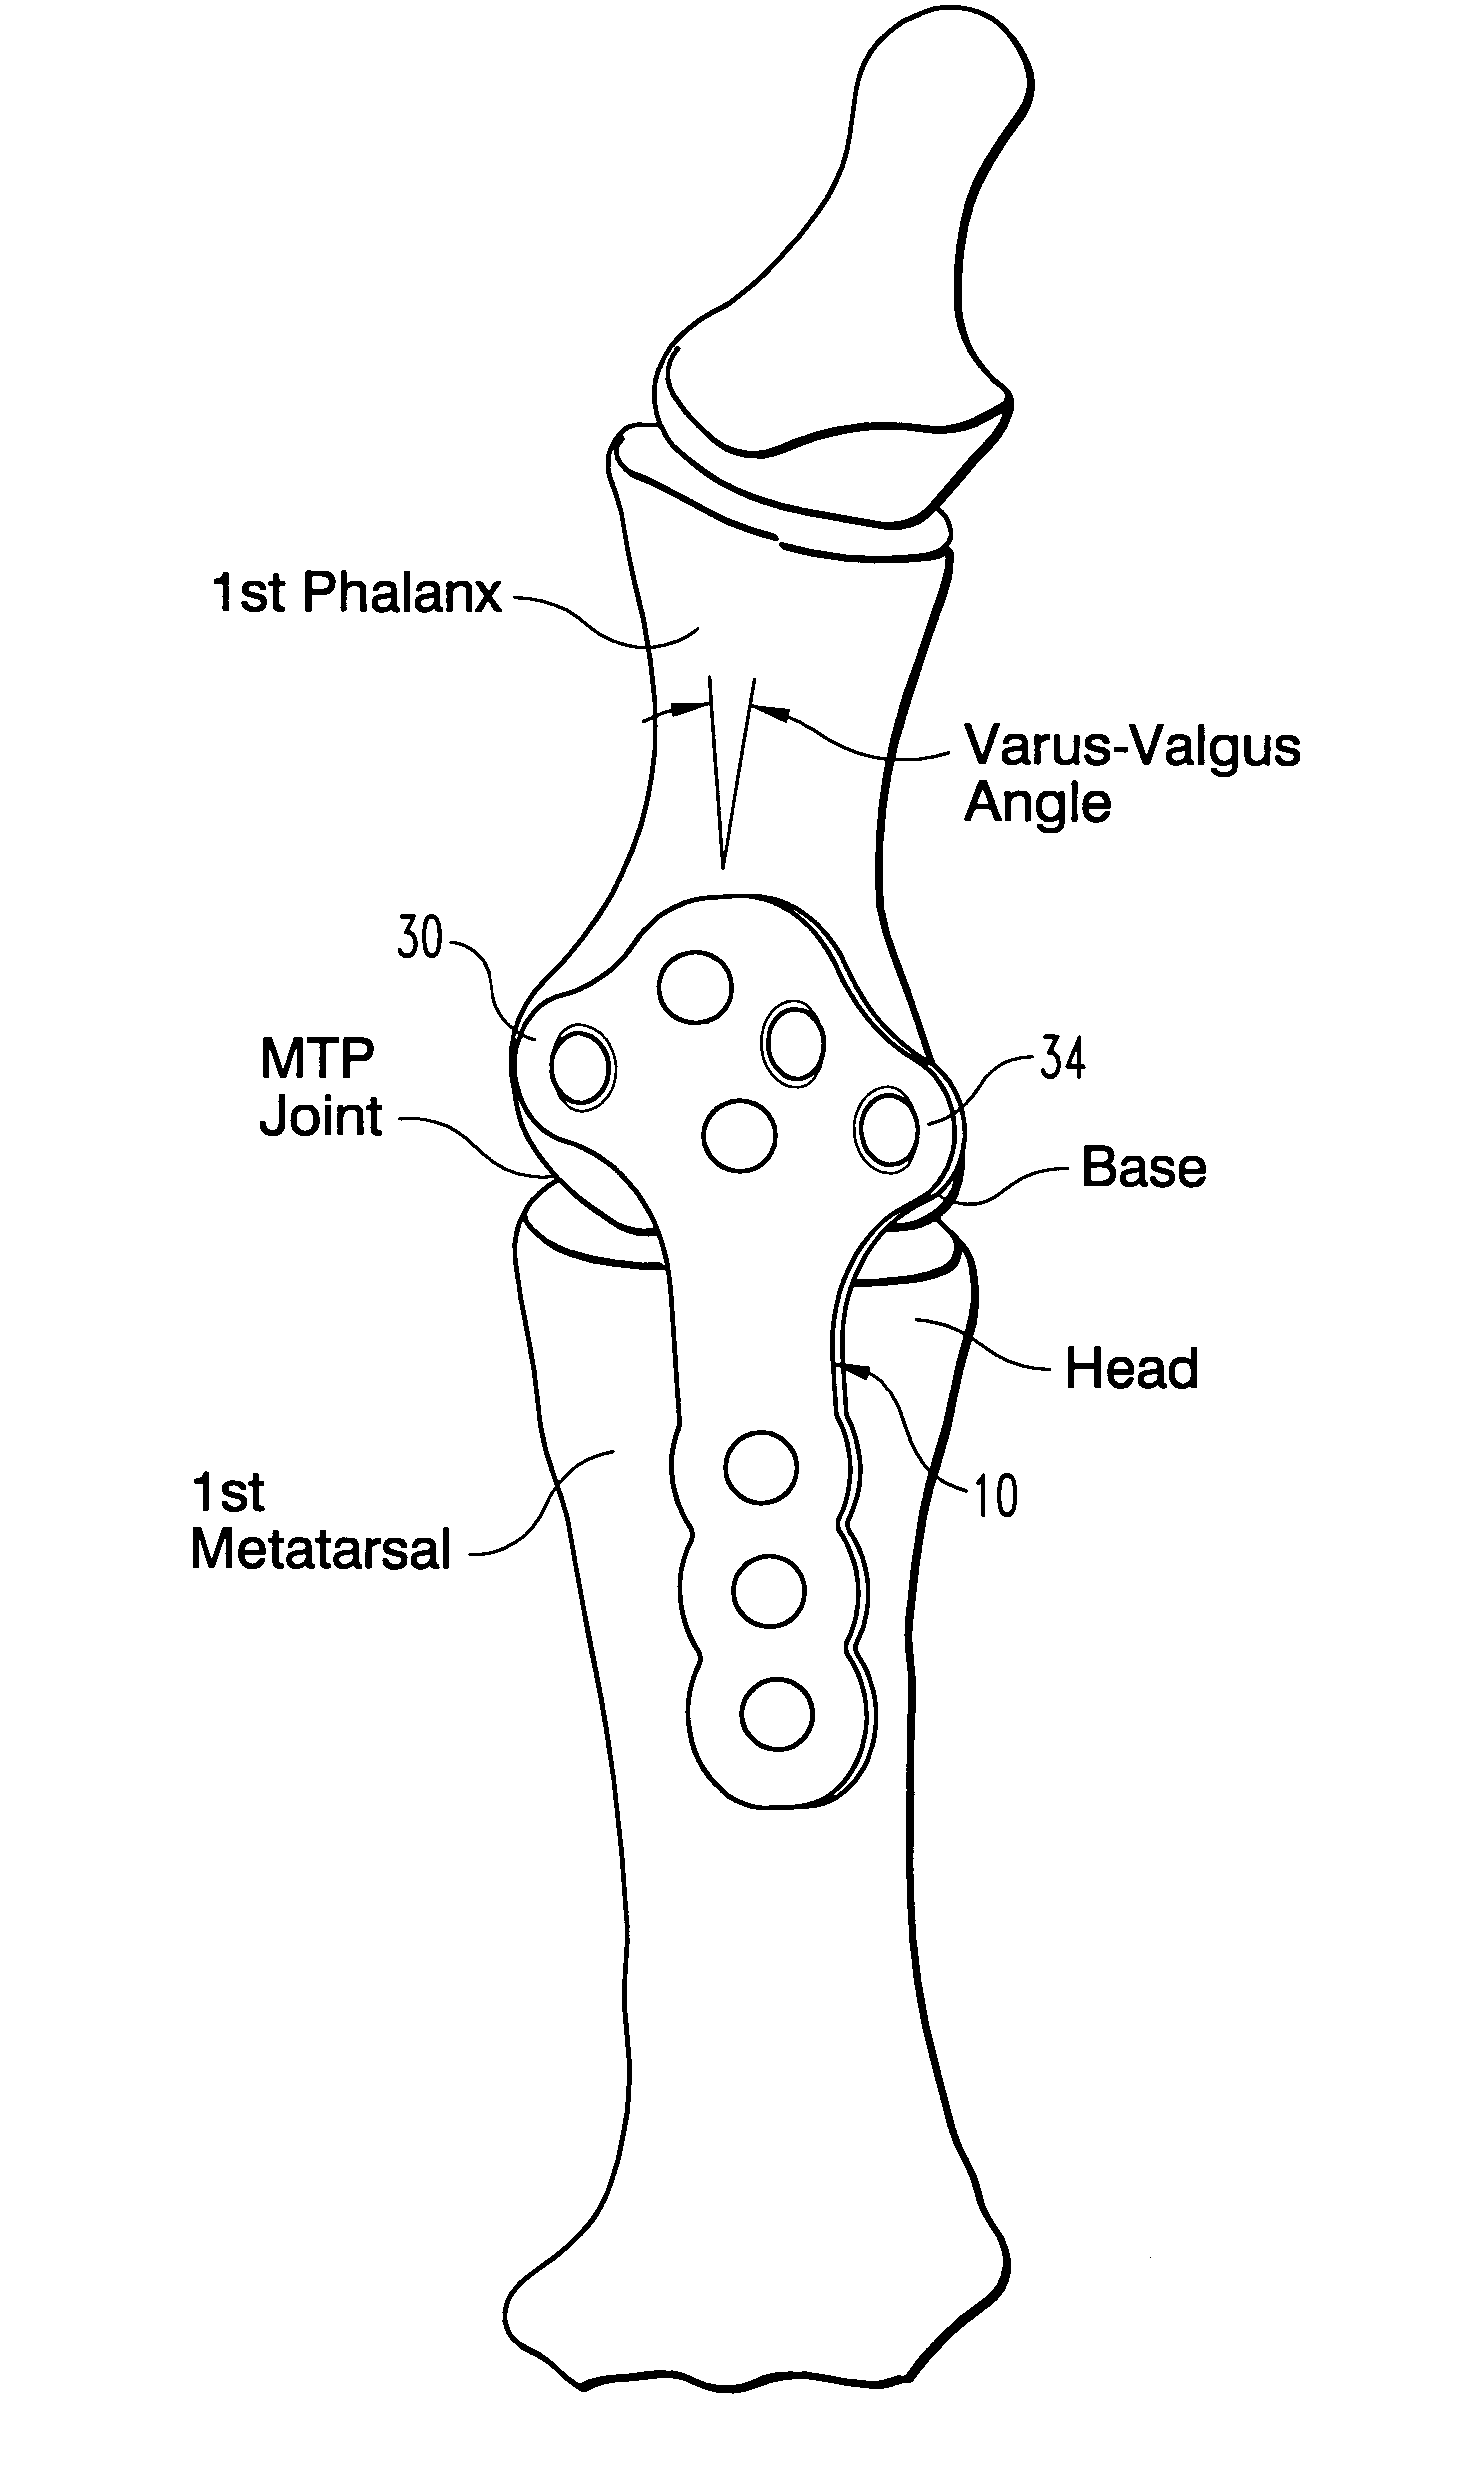 Plate for fusion of the metatarso-phalangeal joint